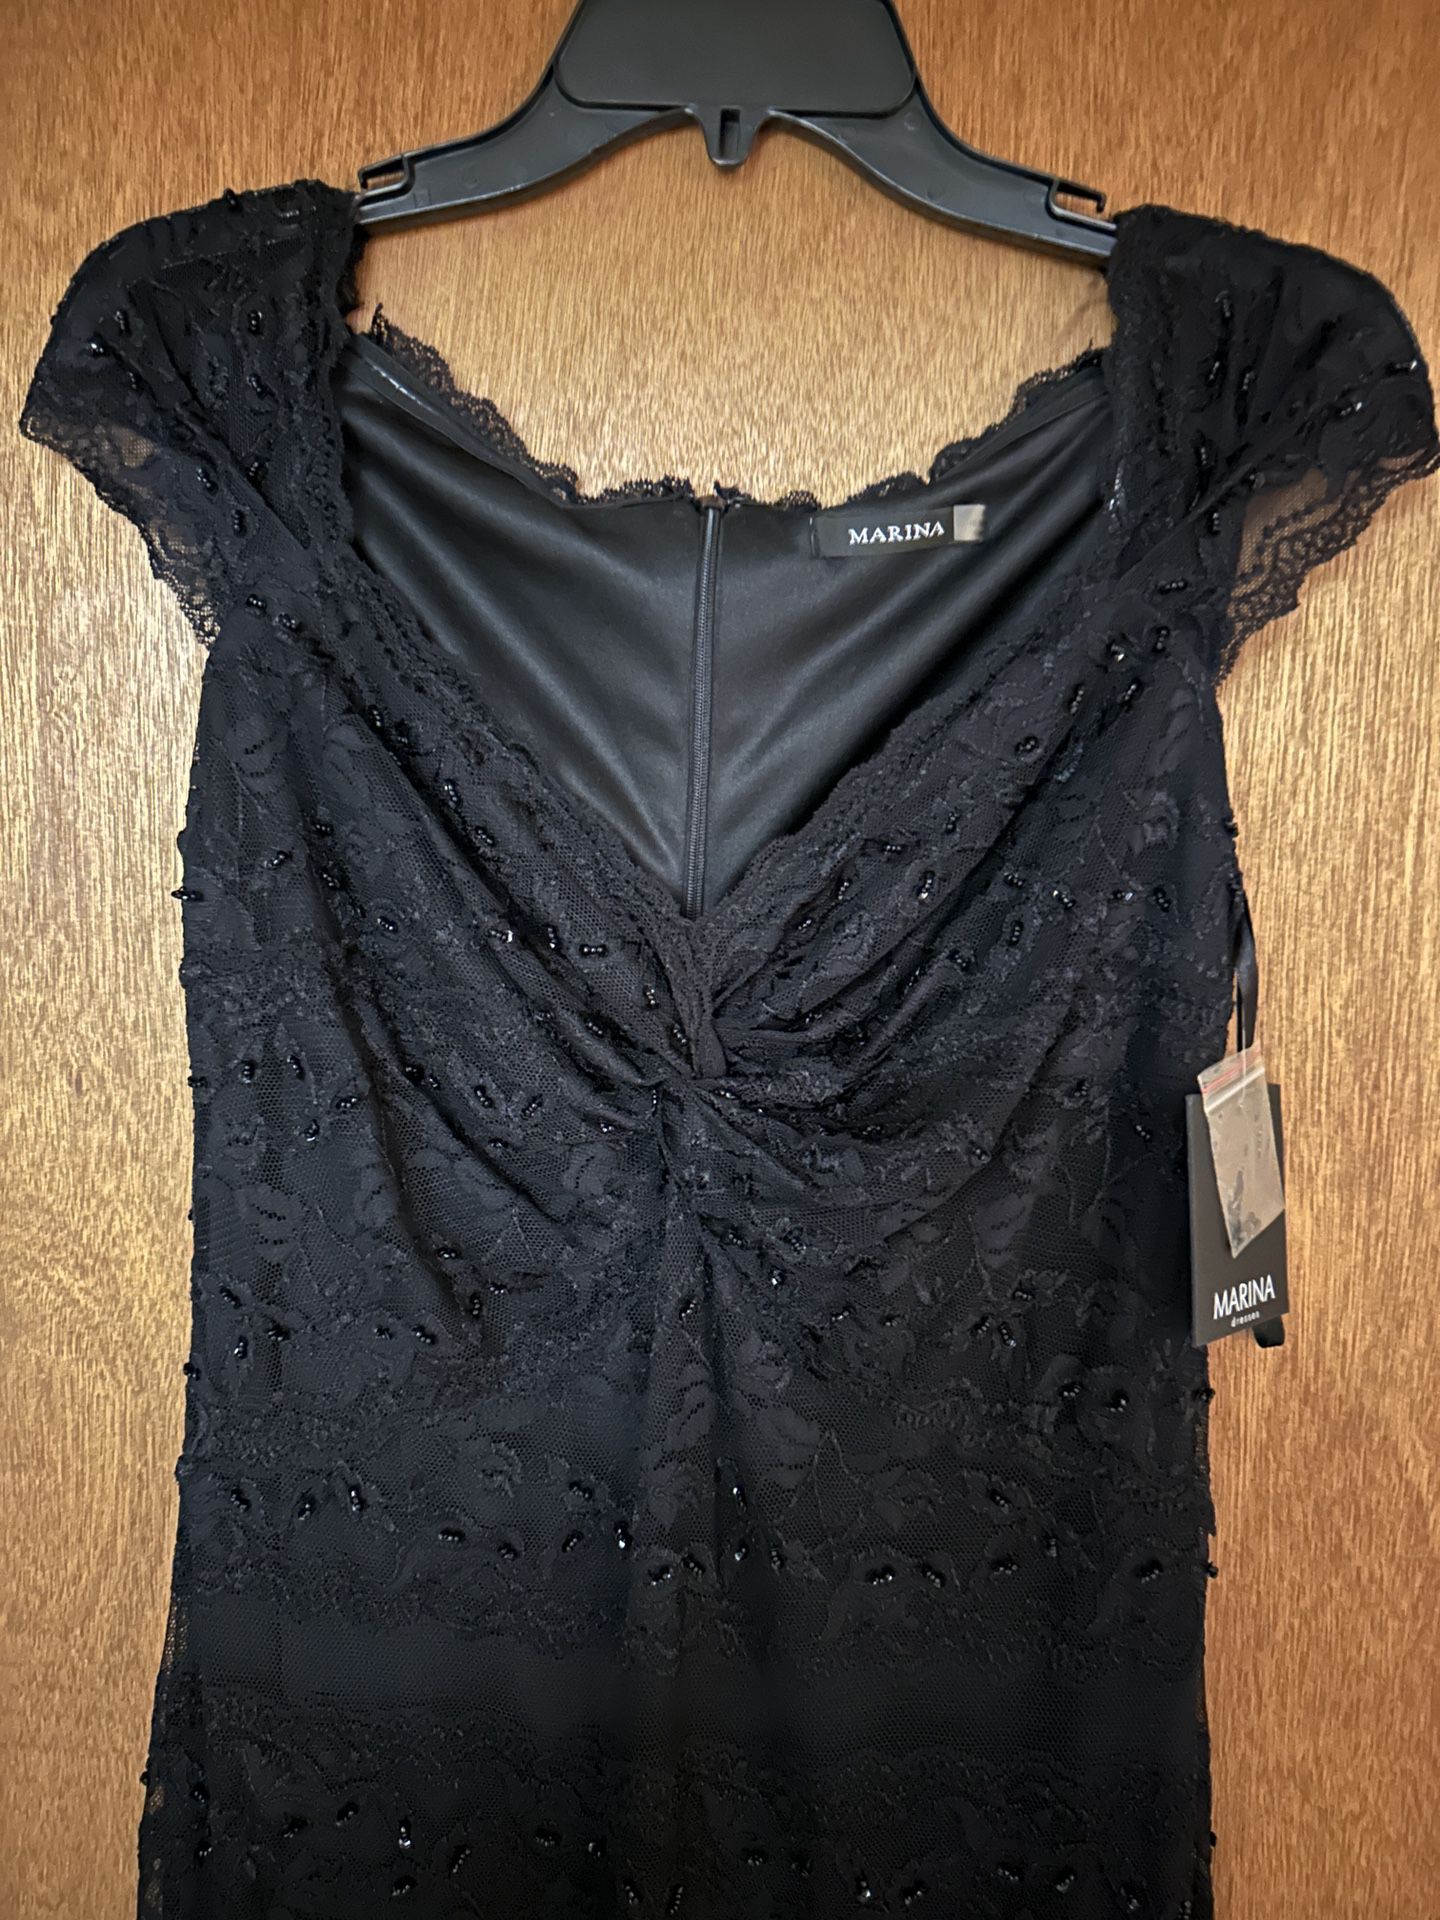 Marina Lace Sequin Black Cocktail Dress Womens 8